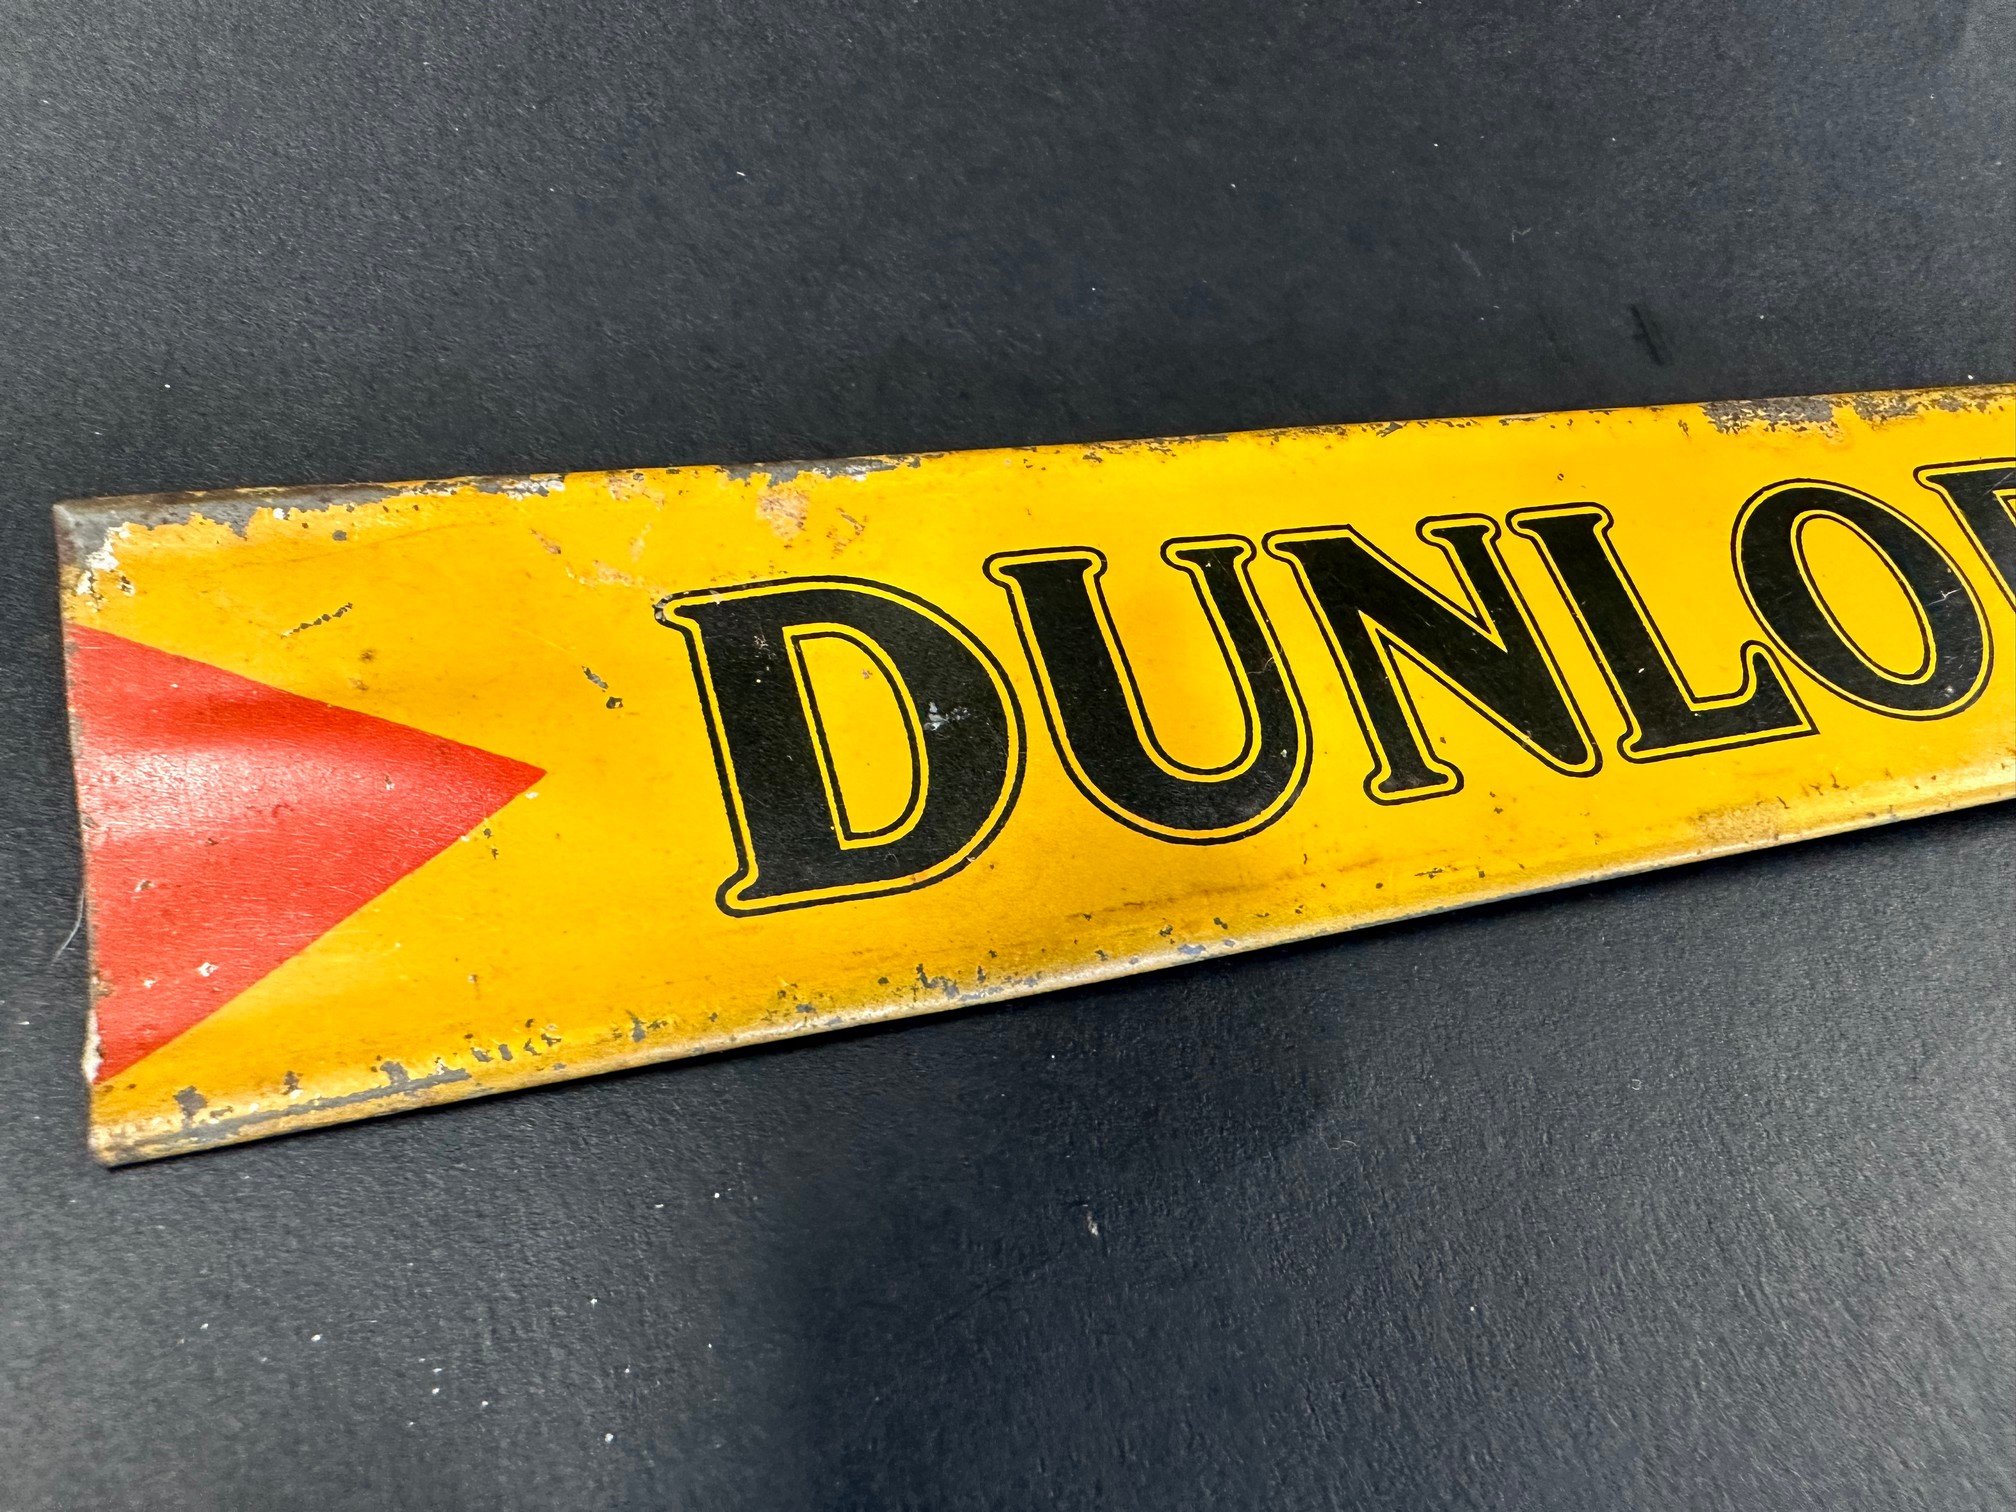 A Dunlop Repair Outfits shelf strip in good condition. - Image 2 of 5